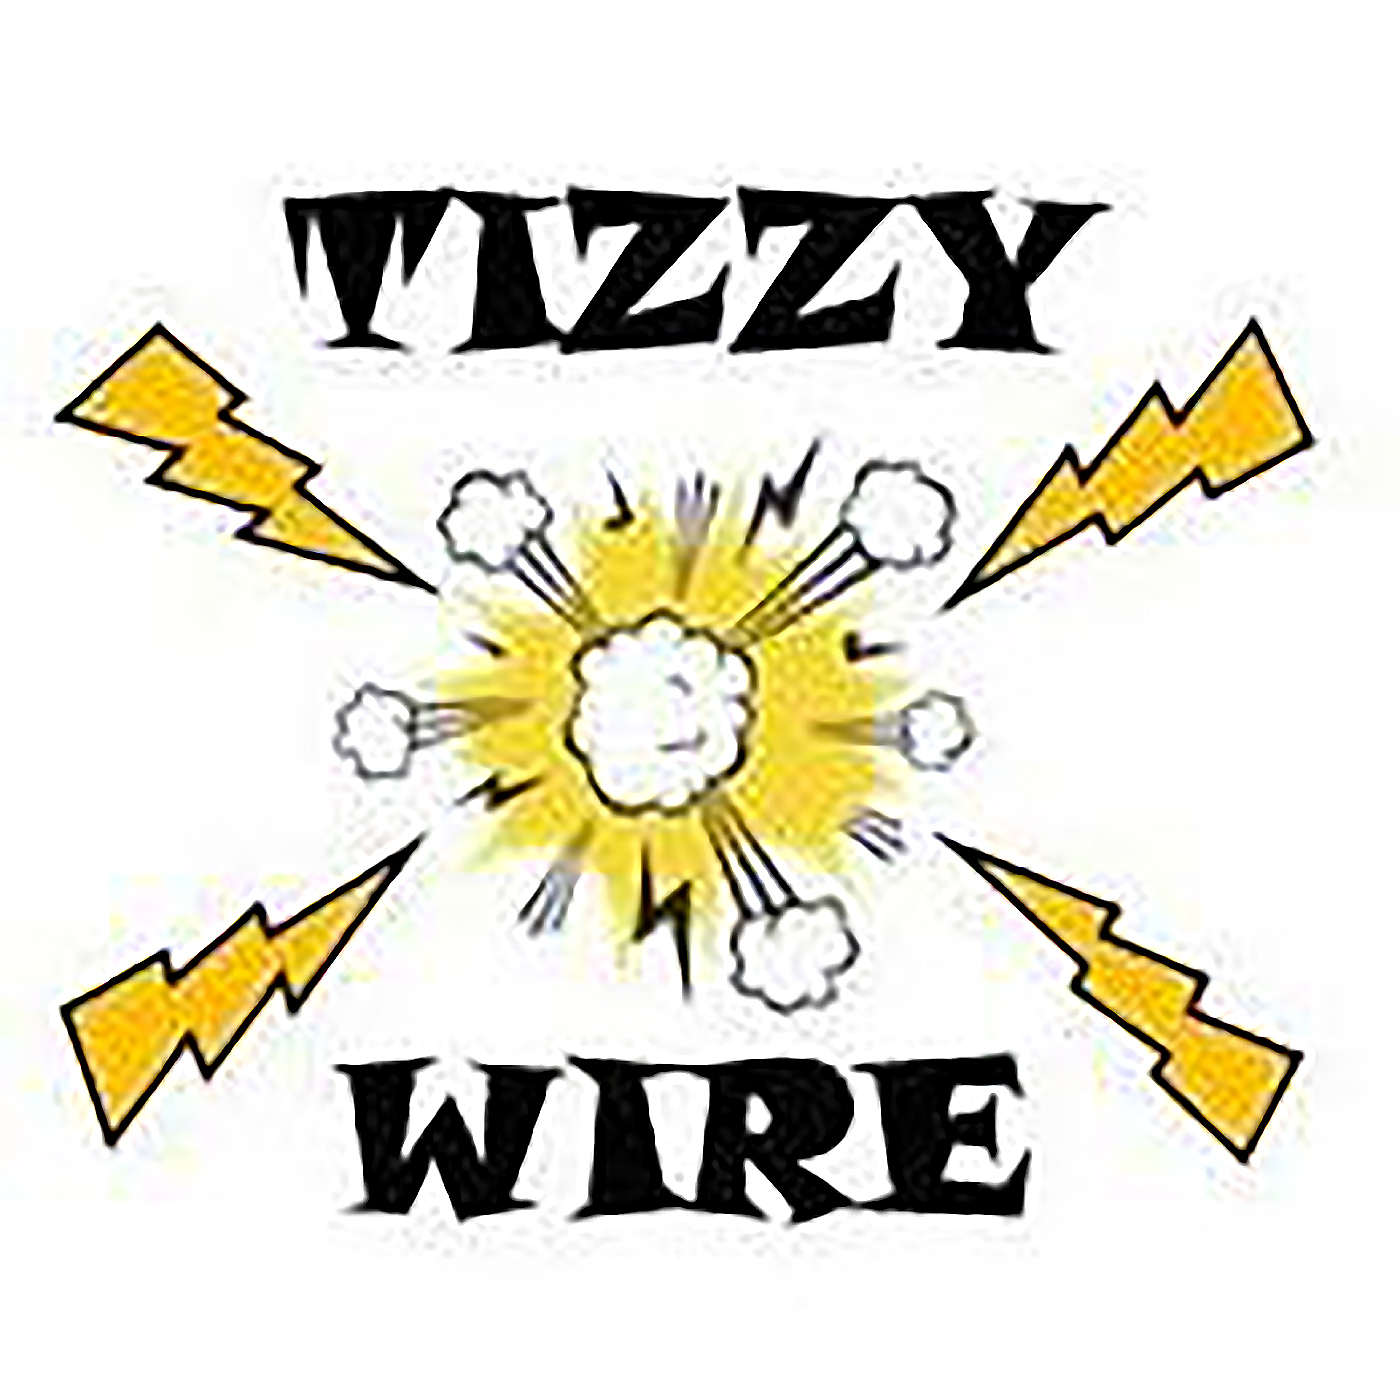 Tizzy Wire Podcast - Ep 3 - Artistic Adventures in Dungeons and Dragons